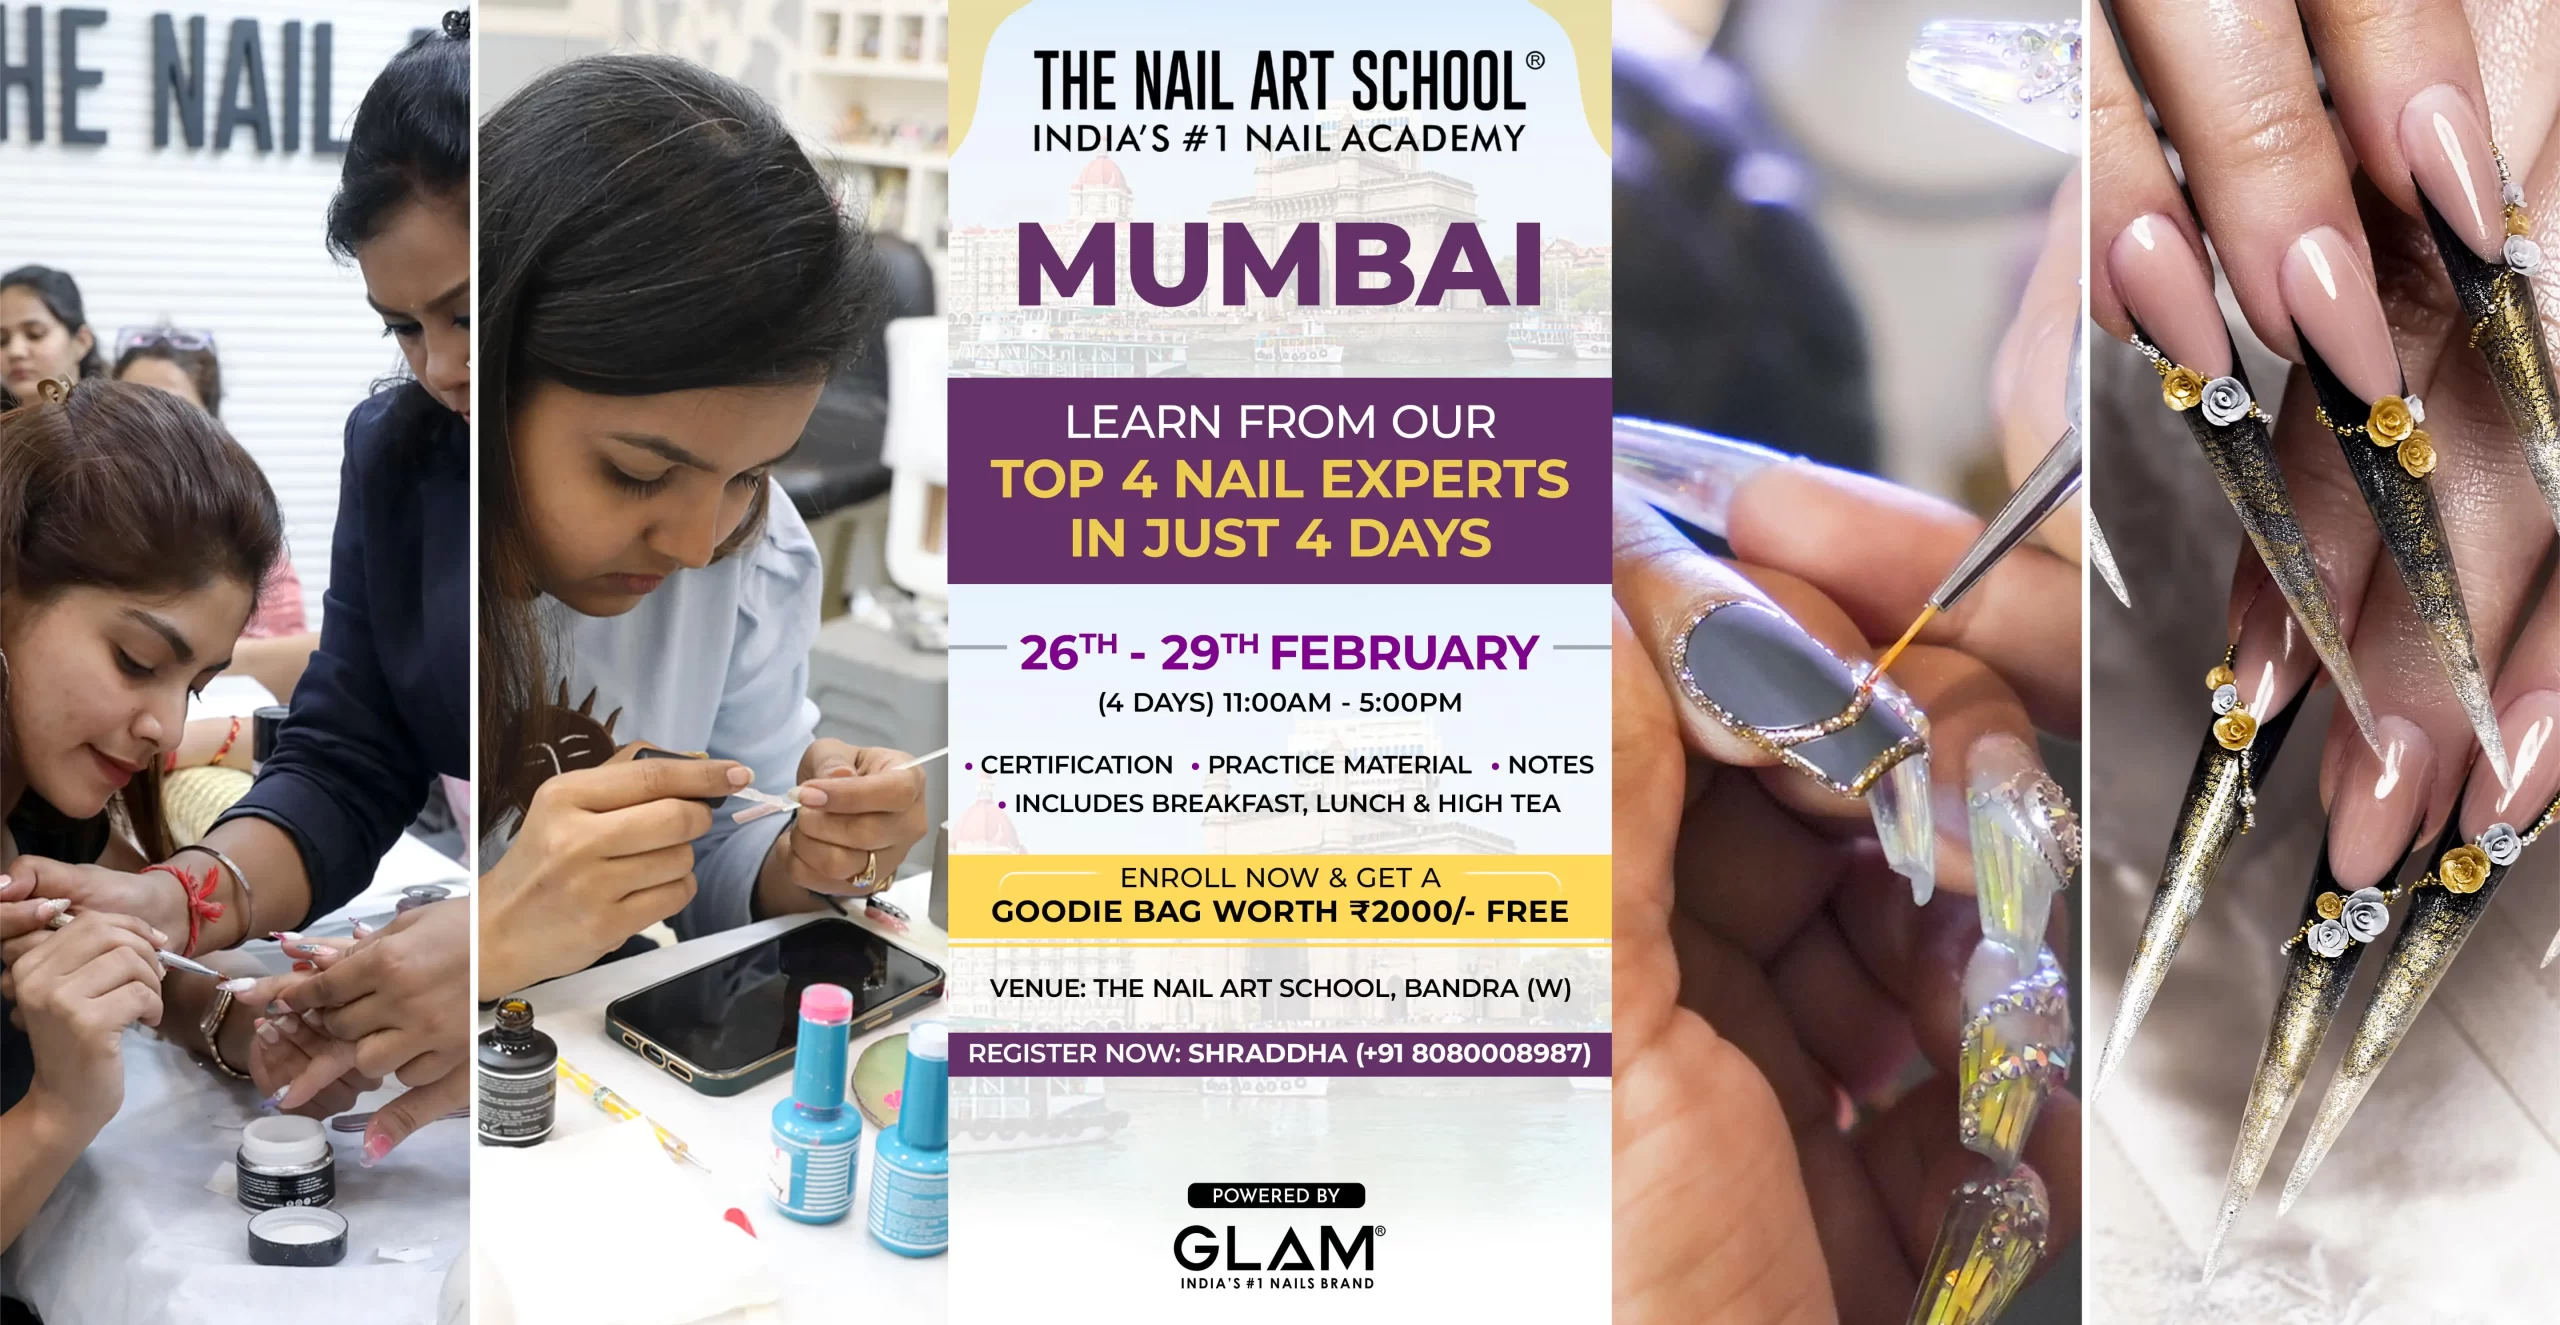 Top Online Training Institutes For Diploma In Nail Art & Extension in Mumbai  - Best Online Training Institutes For Diploma In Nail Art & Extension -  Justdial